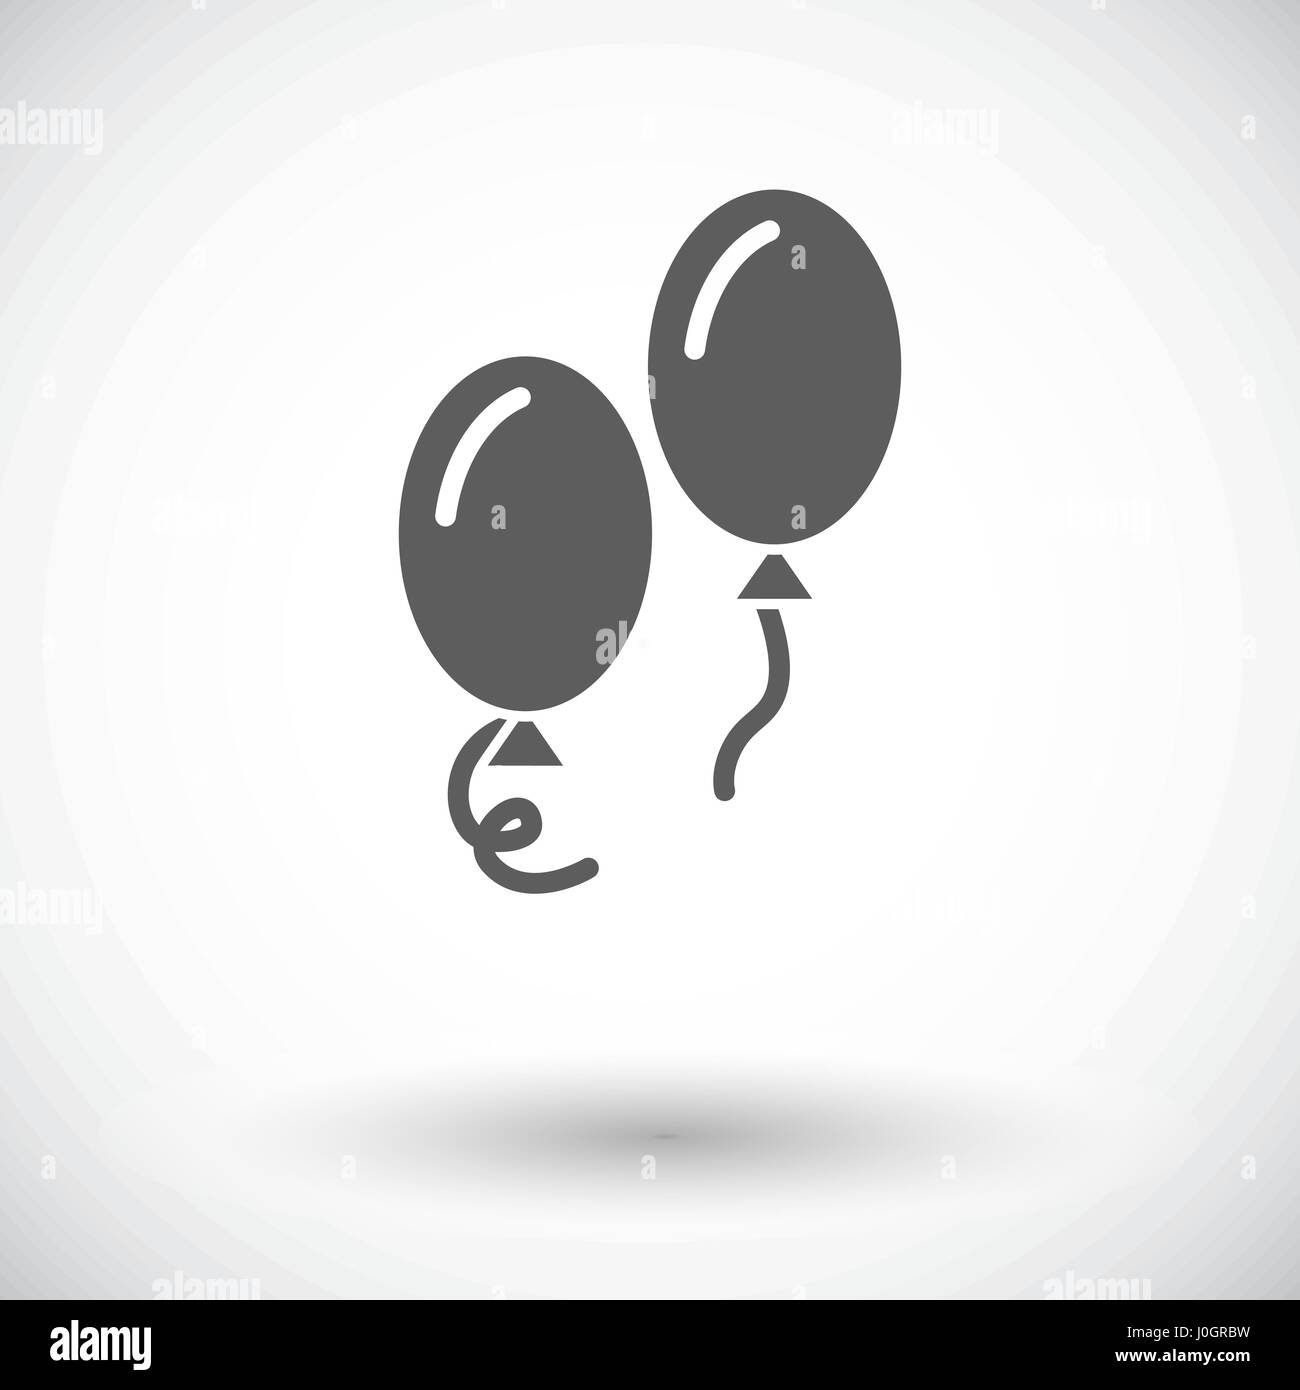 Ballon icon. Flat vector related icon for web and mobile applications. It can be used as - logo, pictogram, icon, infographic element. Vector Illustra Stock Vector